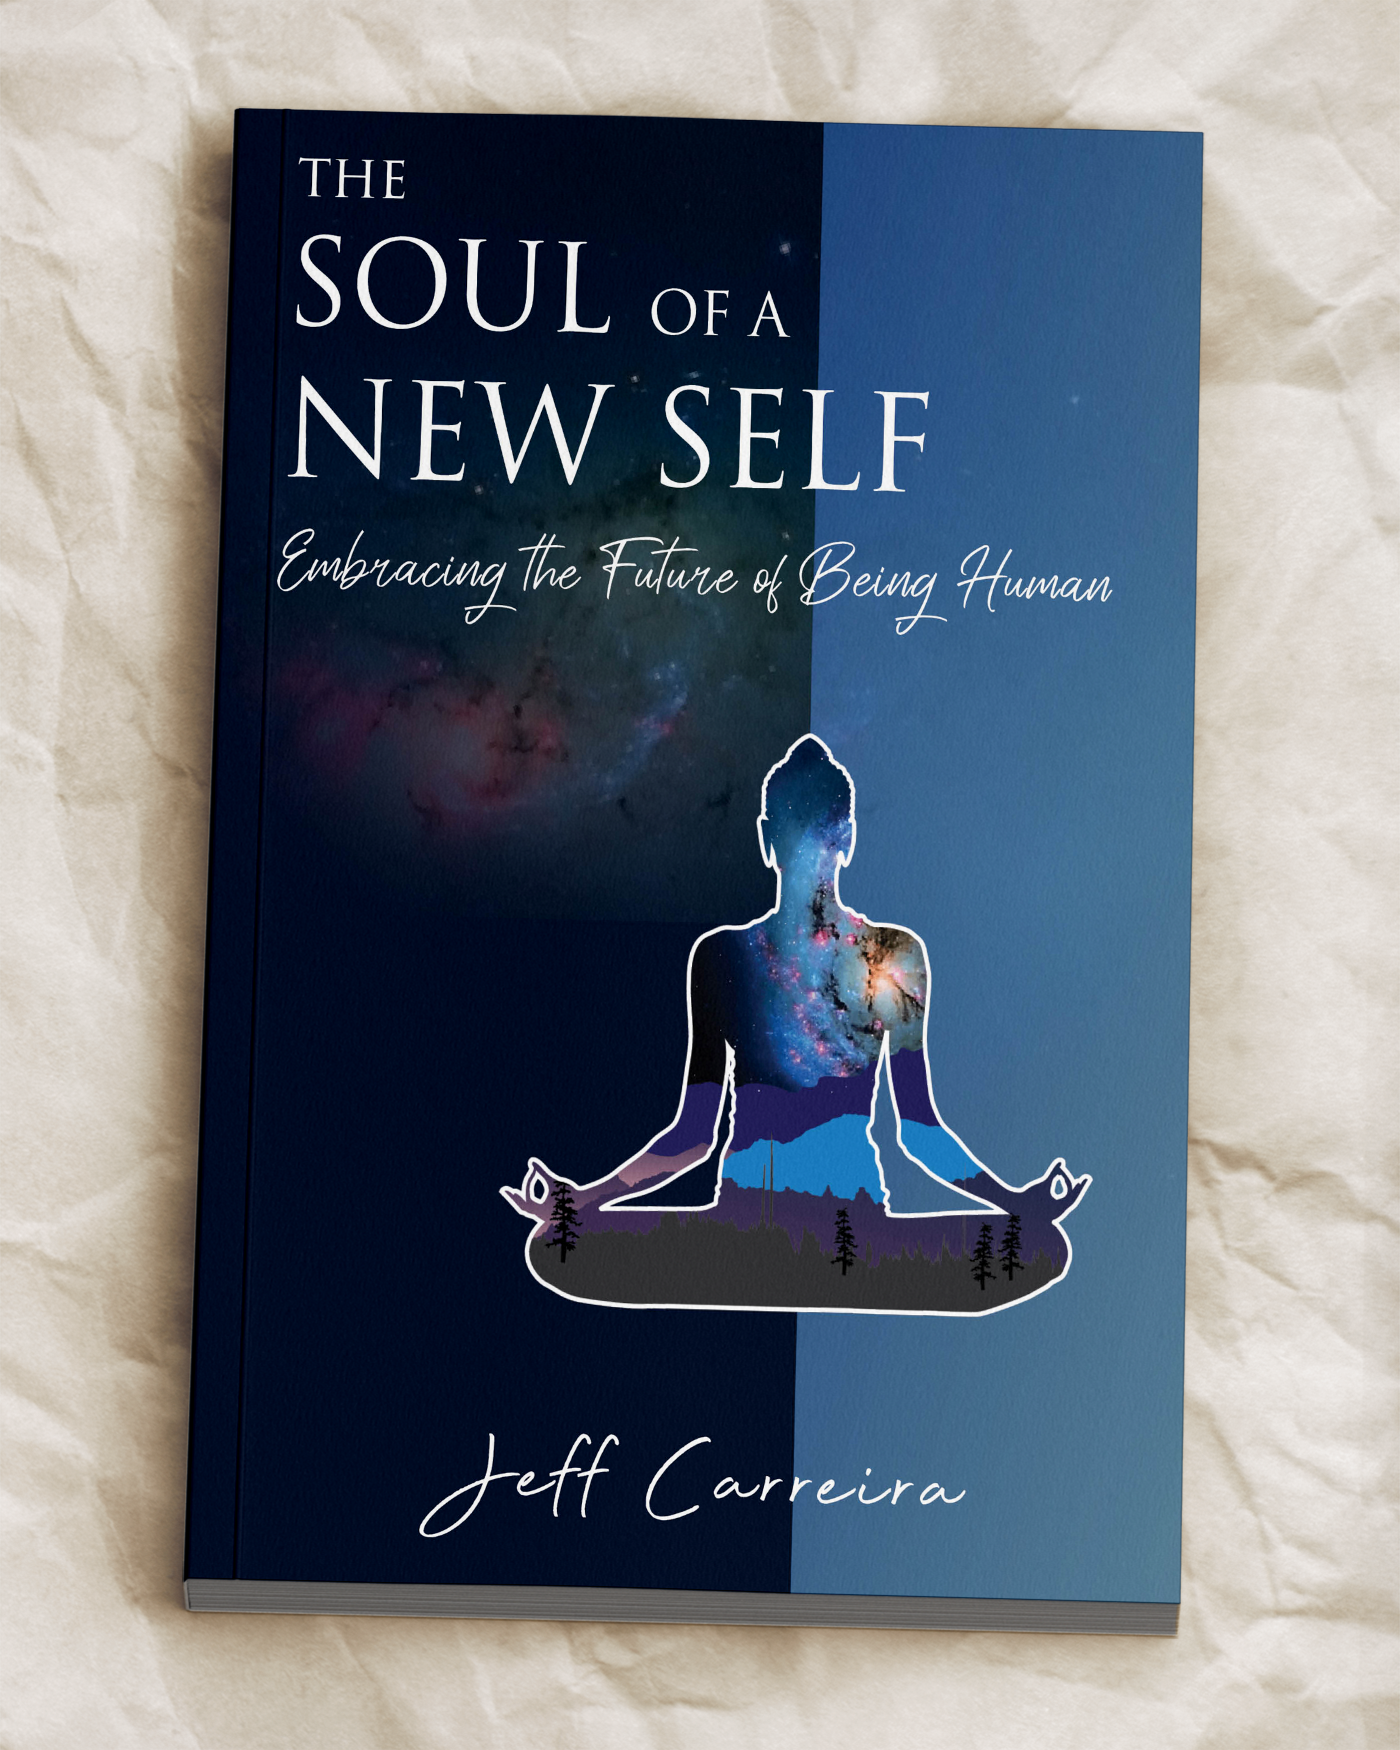 The Soul of a New Self: Embracing the Future of Being Human